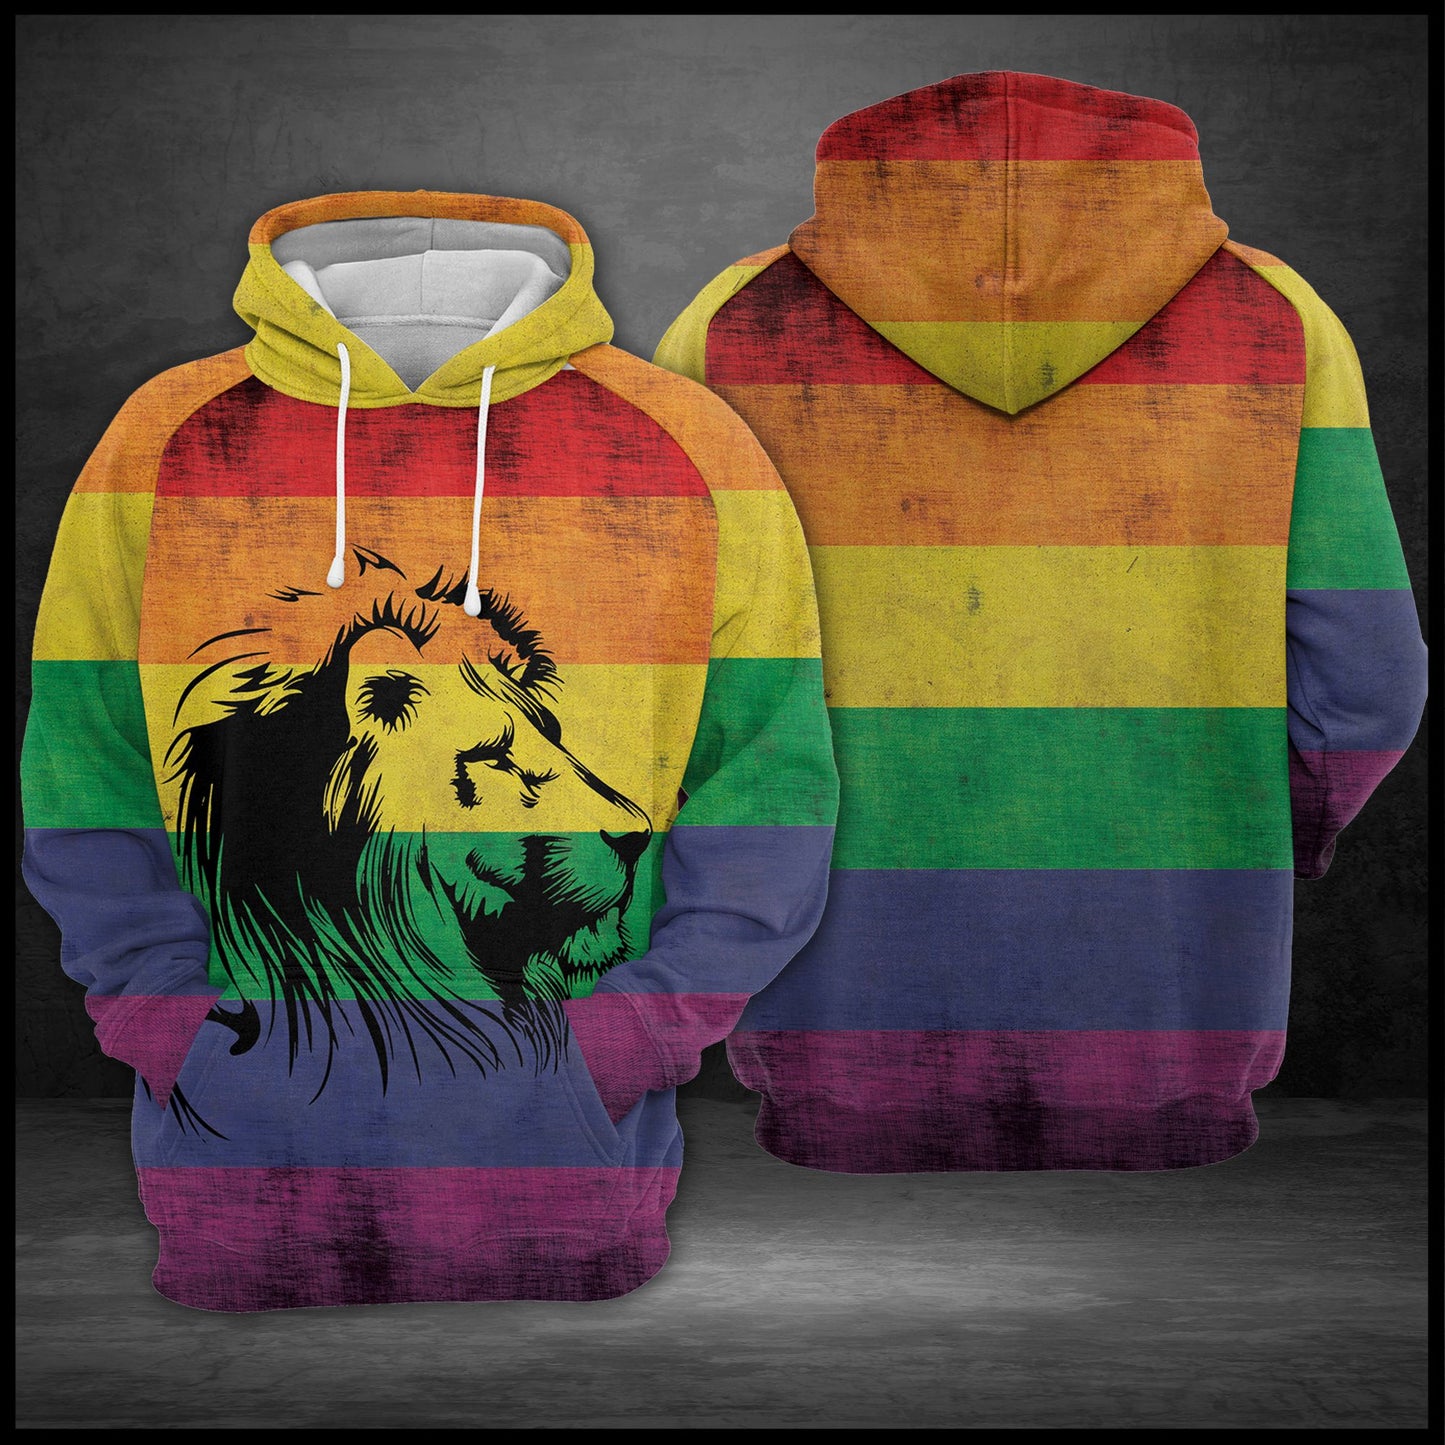 Lion LGBT G5904 - All Over Print Unisex Hoodie